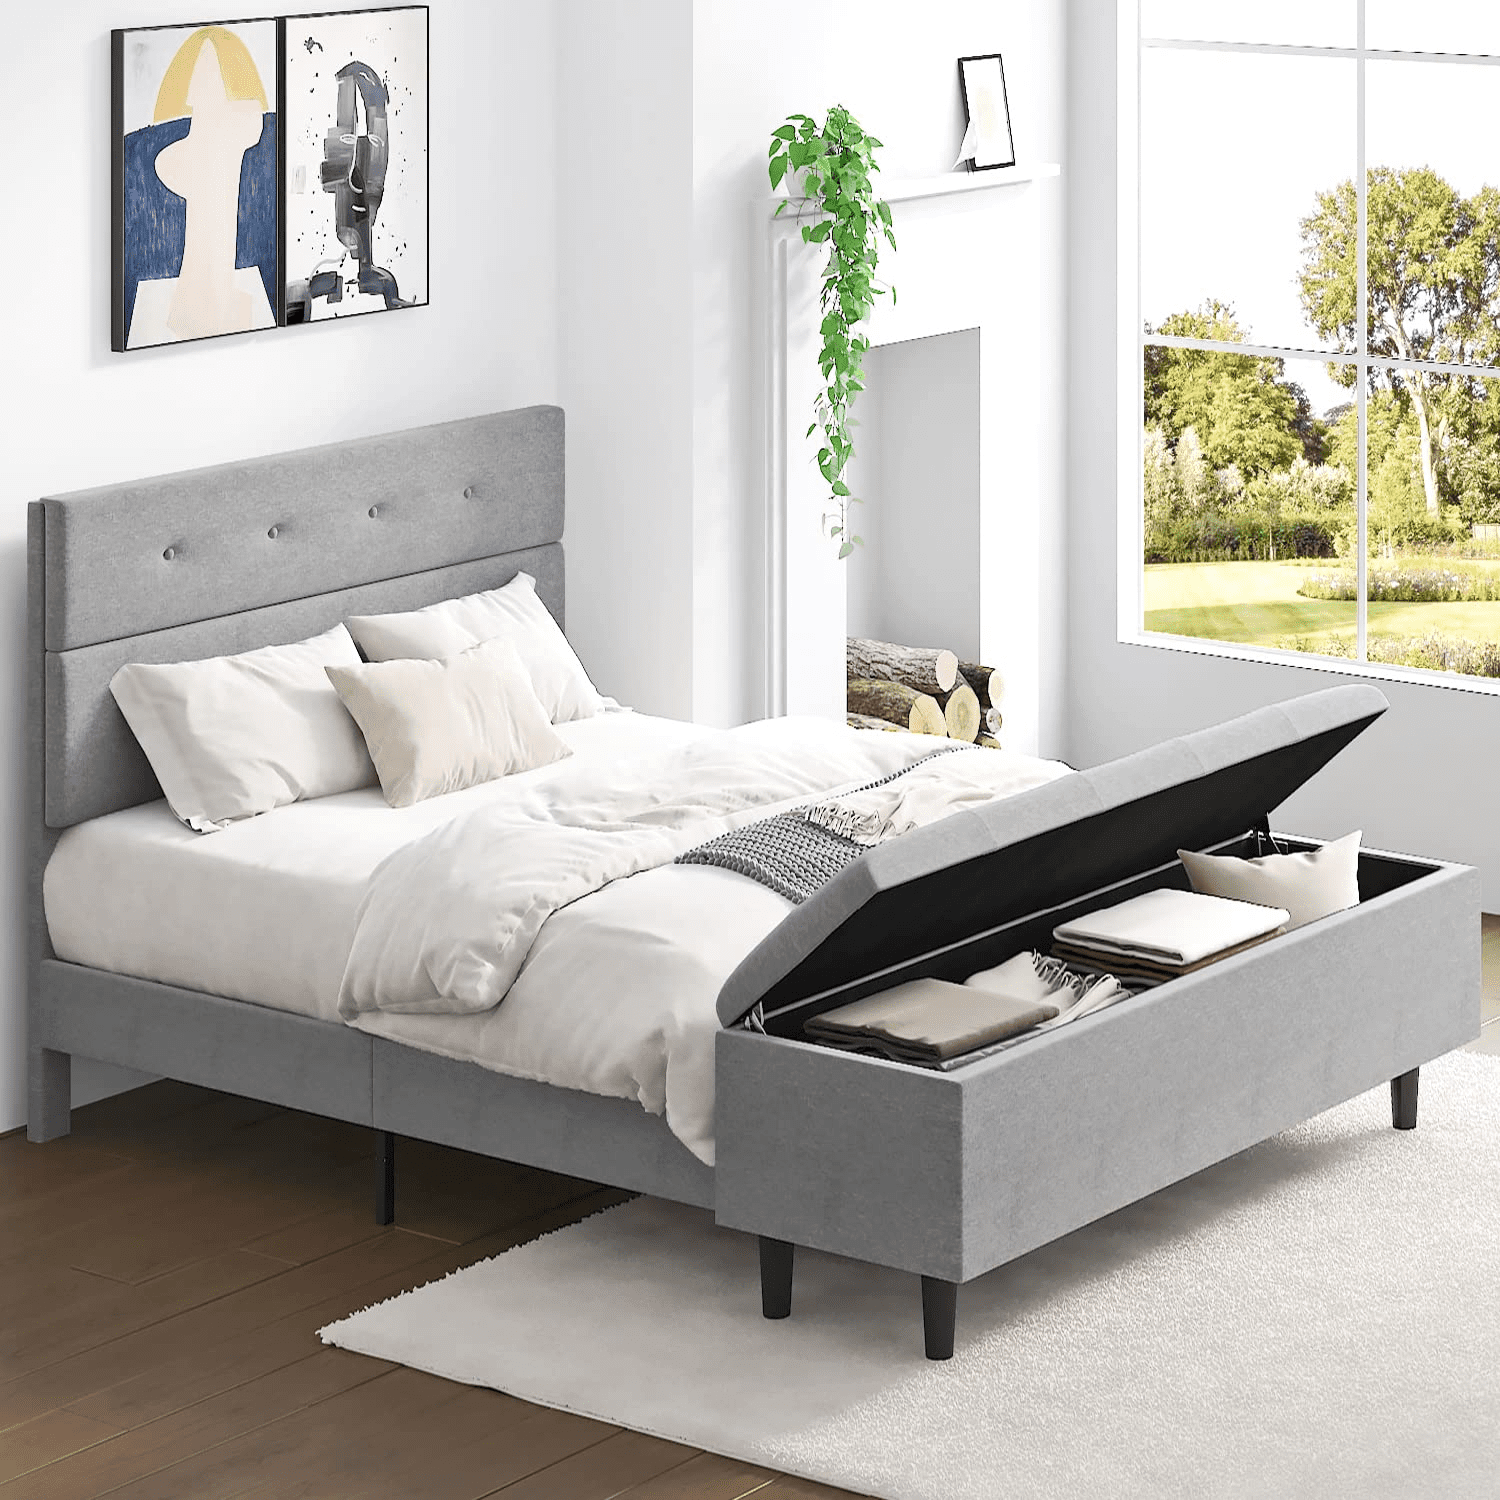 Einfach Queen Upholstered Bed Frame with 120 L Large Storage Ottoman, Light Fabric, Button-Tufted - Walmart.com